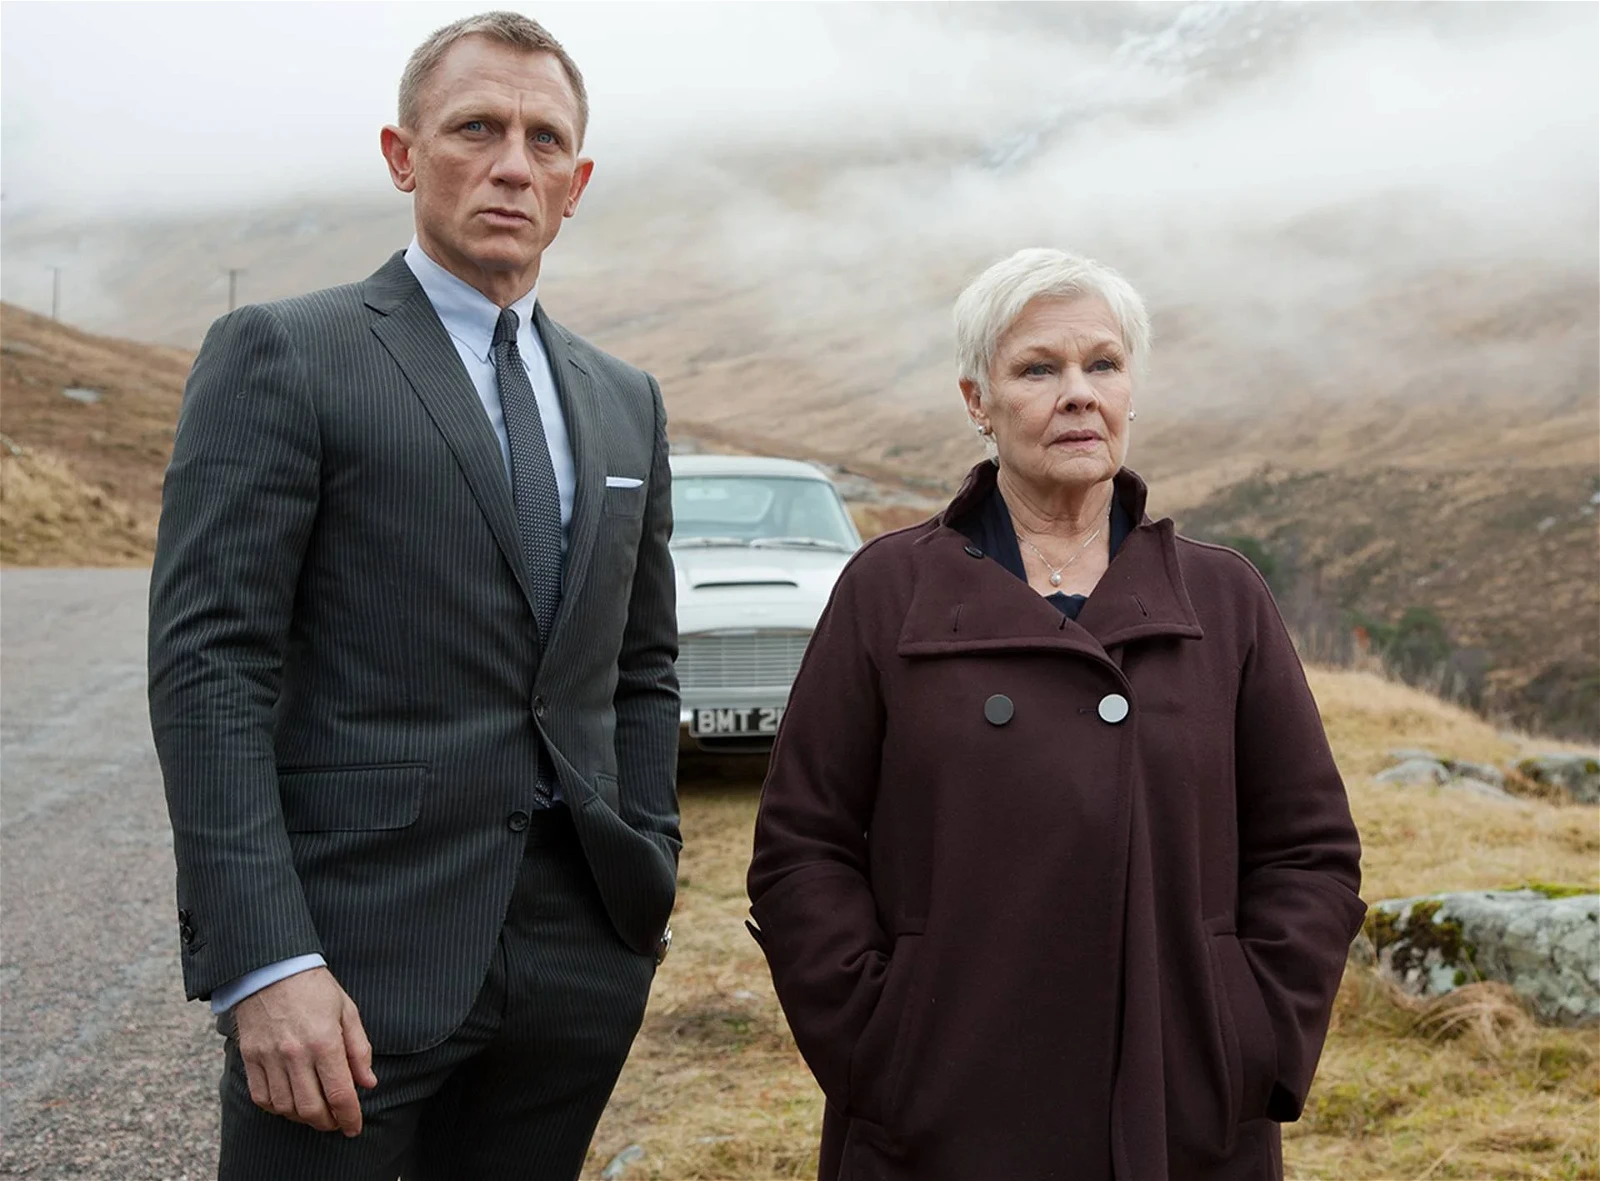 Judi Dench with Daniel Craig in a still from the James Bond franchise